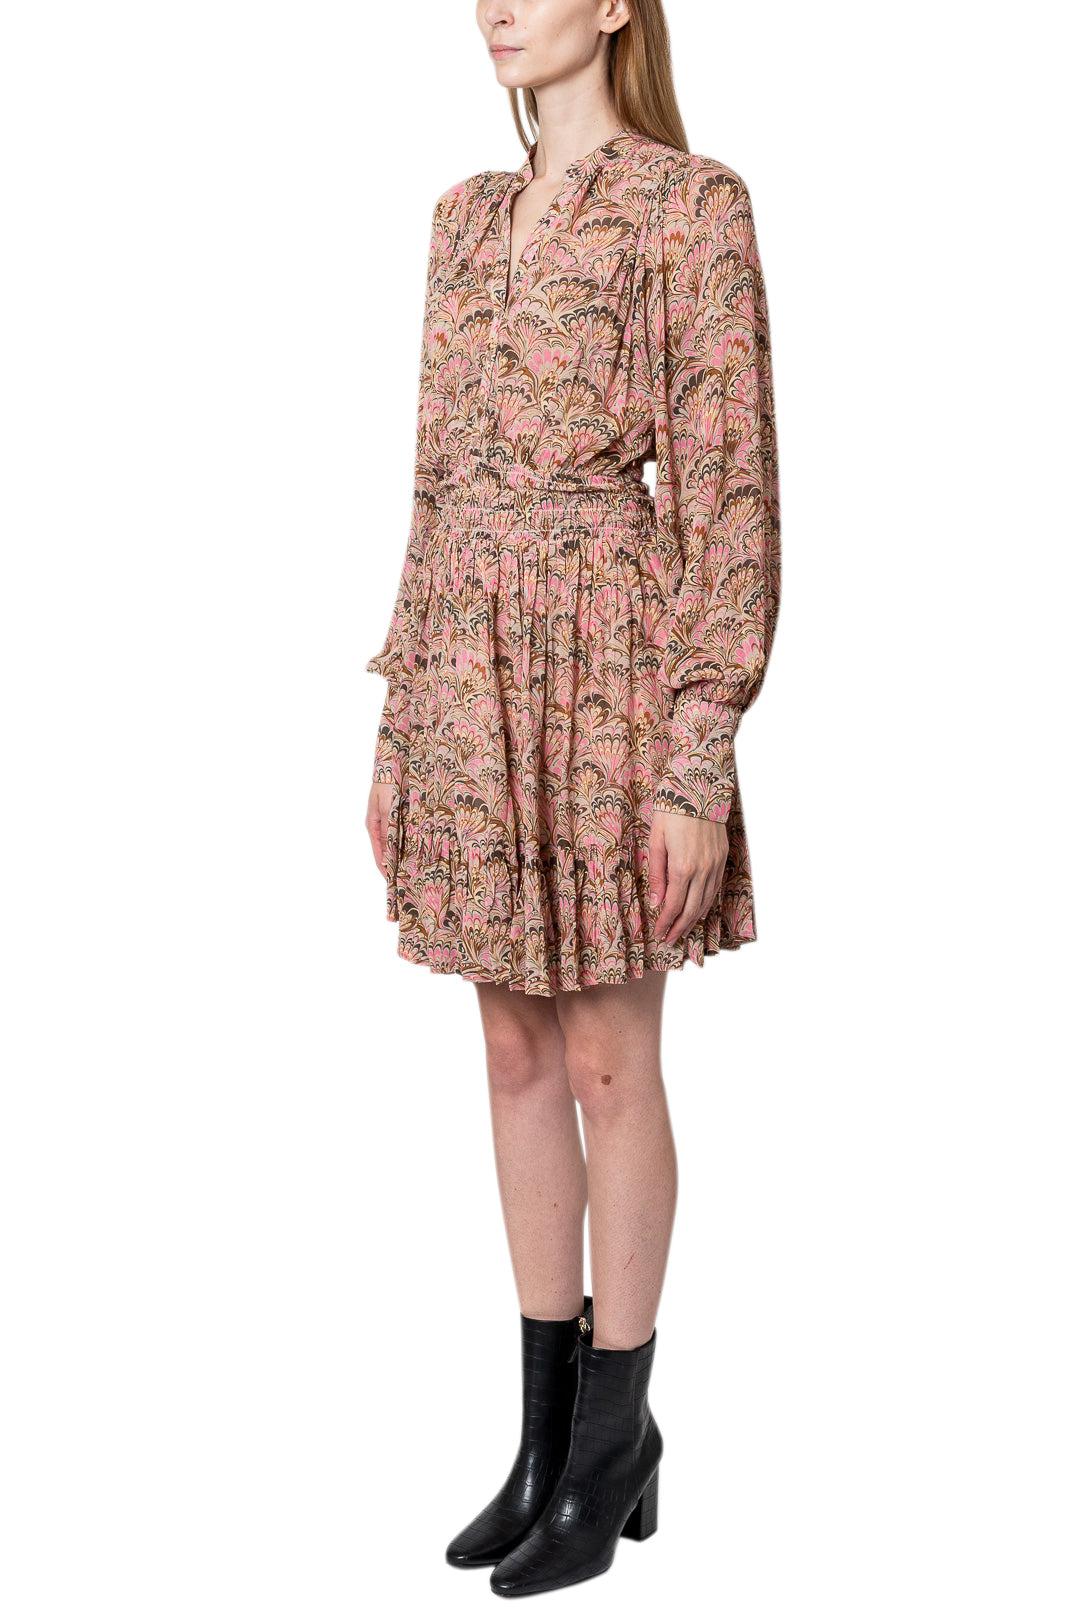 By Timo-Vintage print midi dress-2340547-dgallerystore